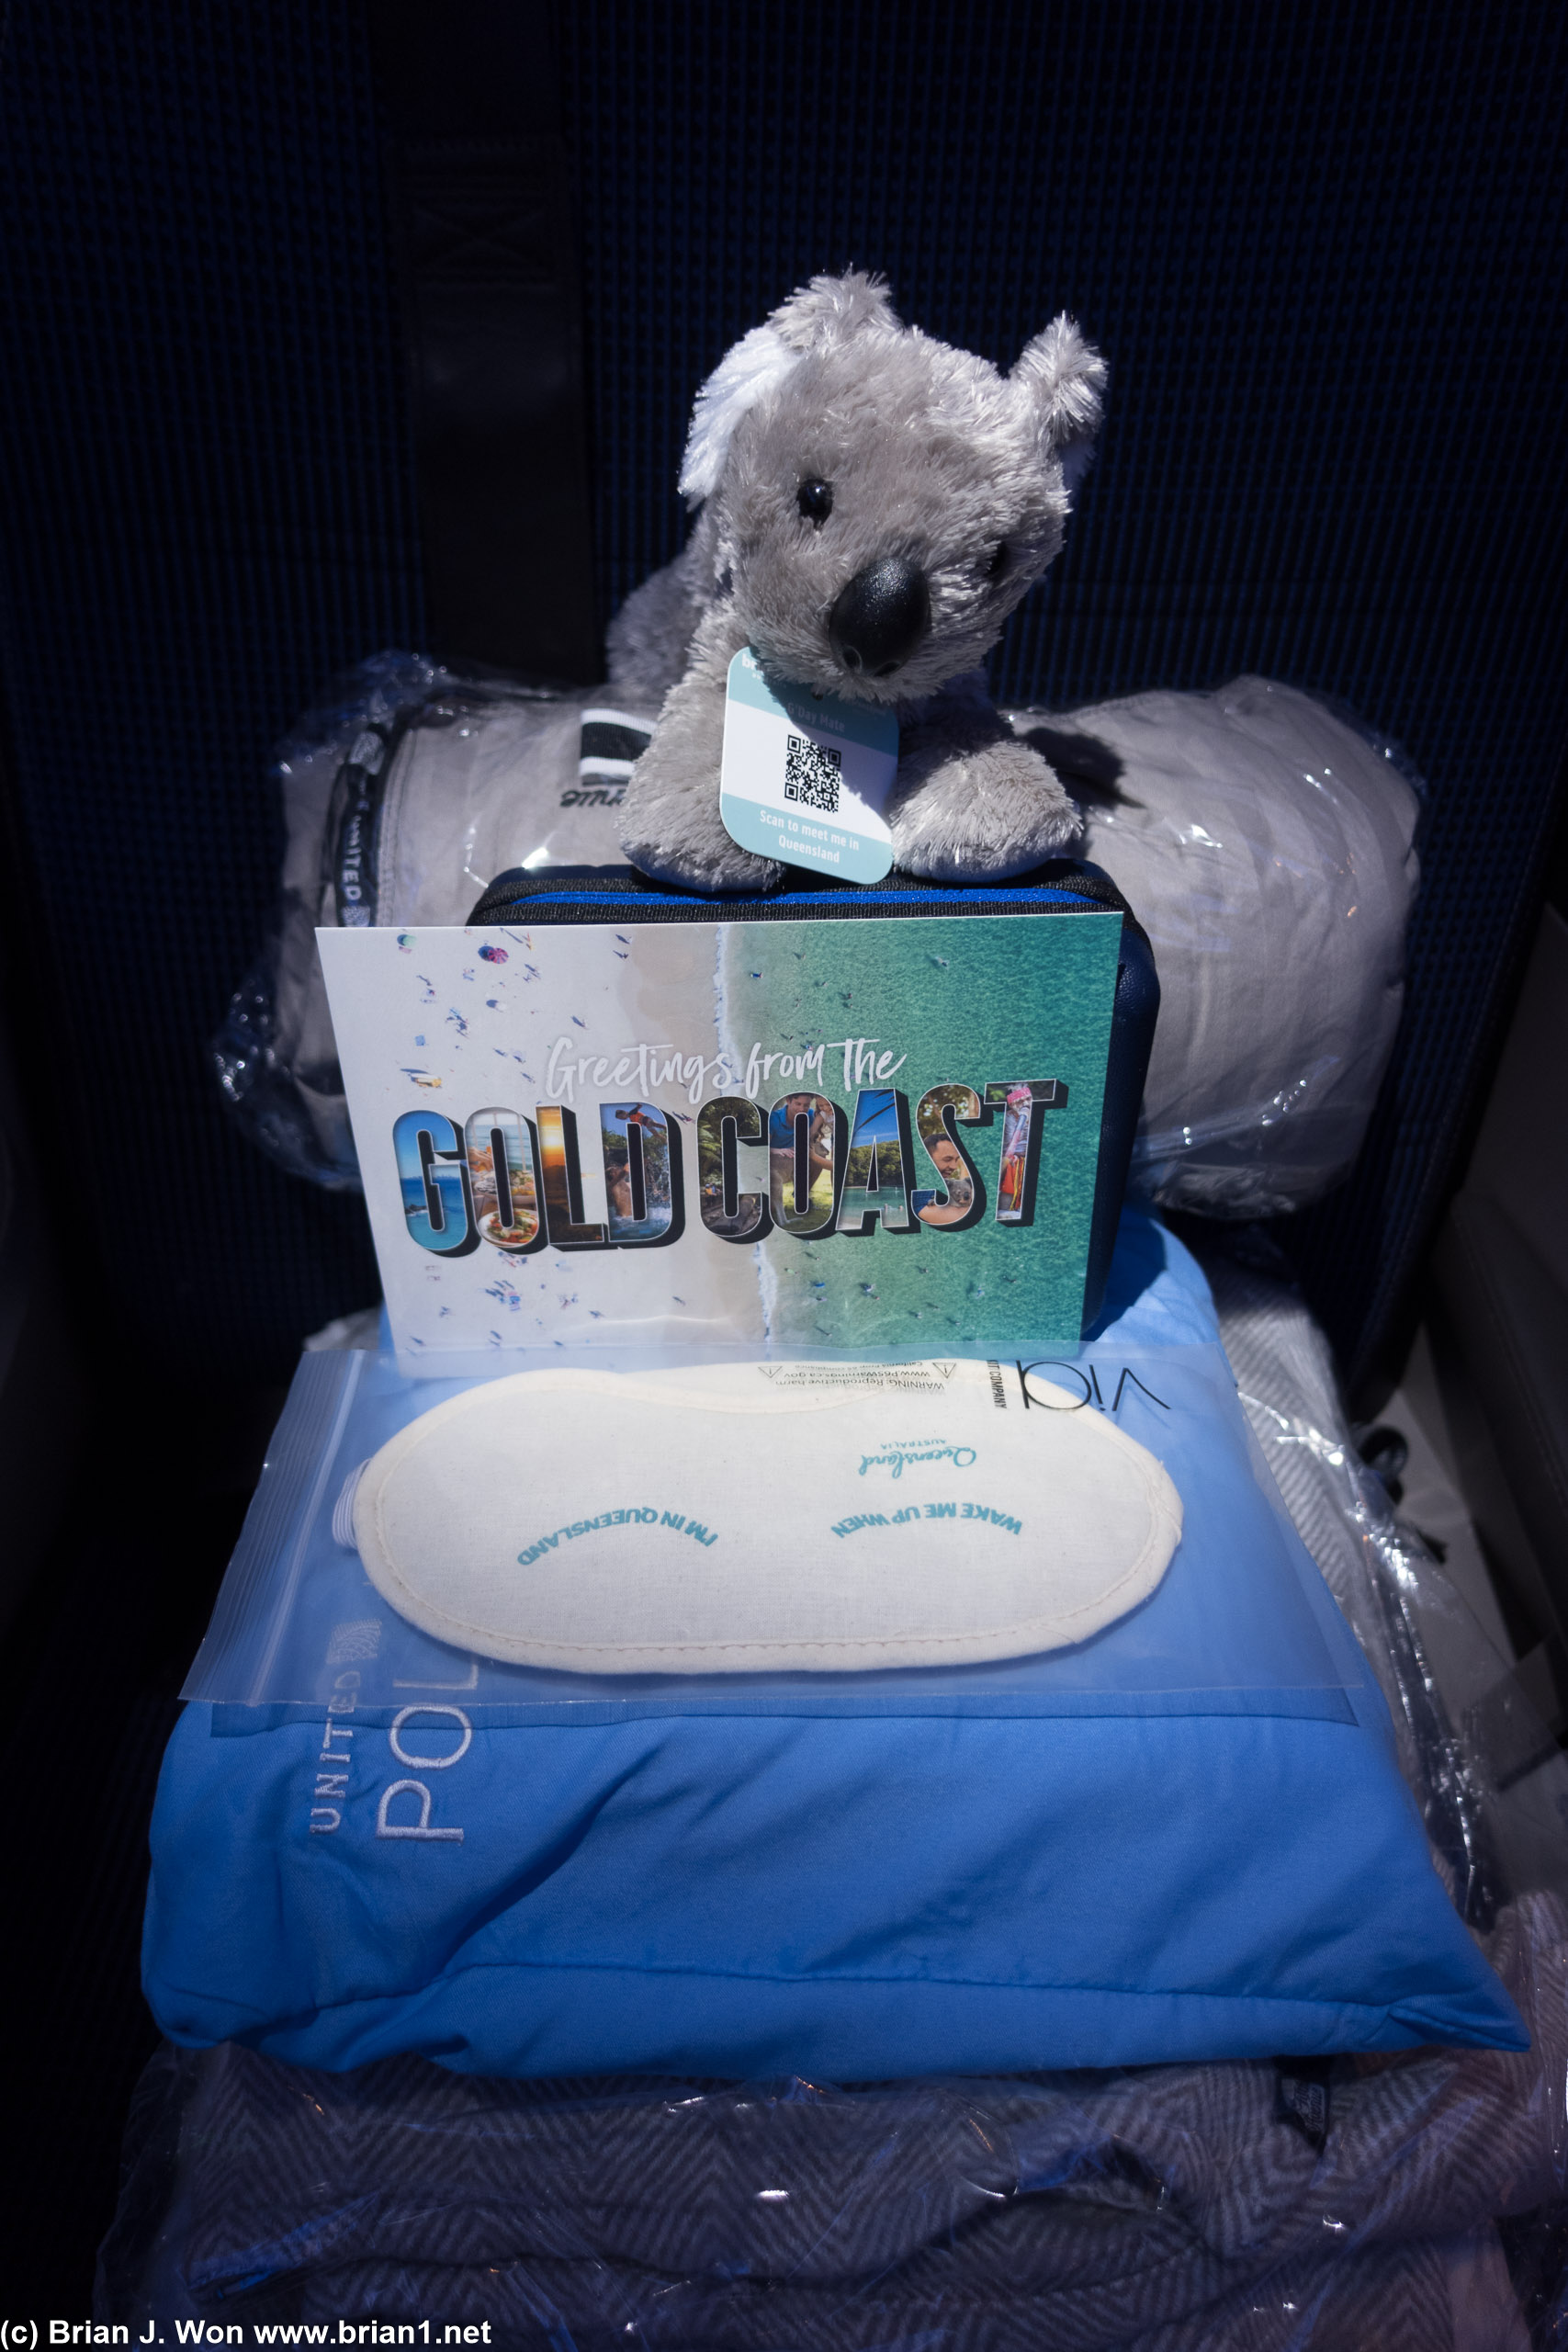 Polaris amenities at the seat, including an inaugural flight special koala, Gold Coast tourism flyer, and eye mask.